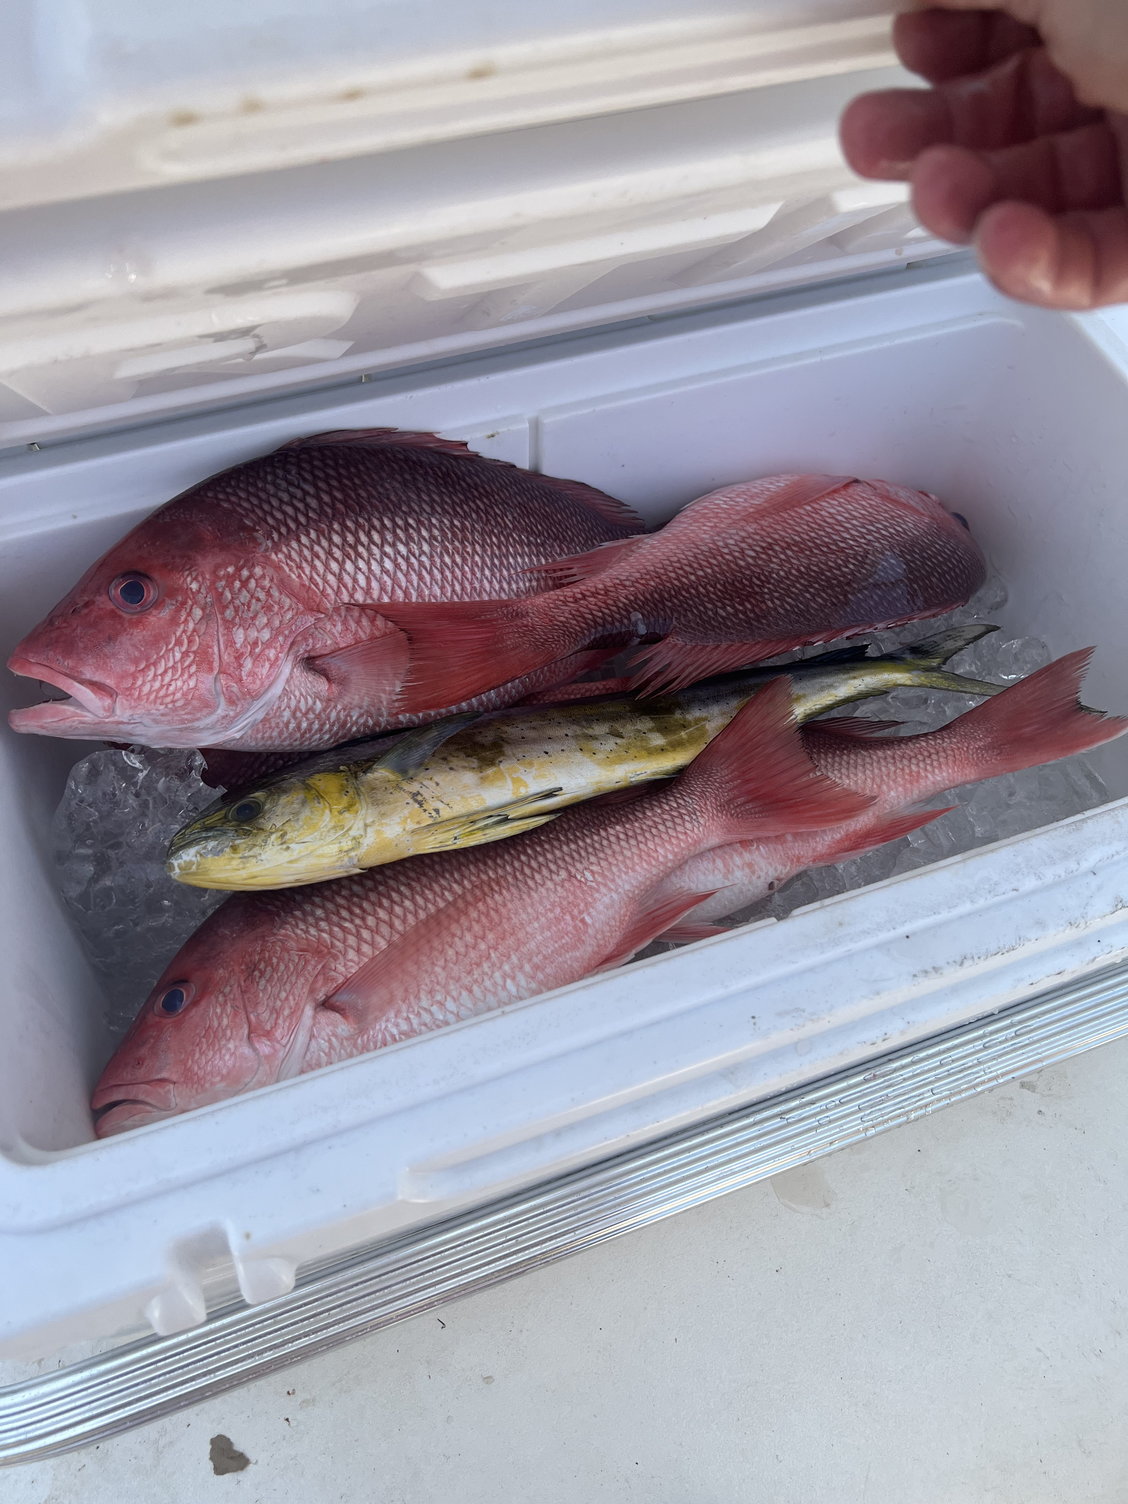 What Kind of Bait Do You Use to Catch SNAPPER in the Gulf of Mexico?